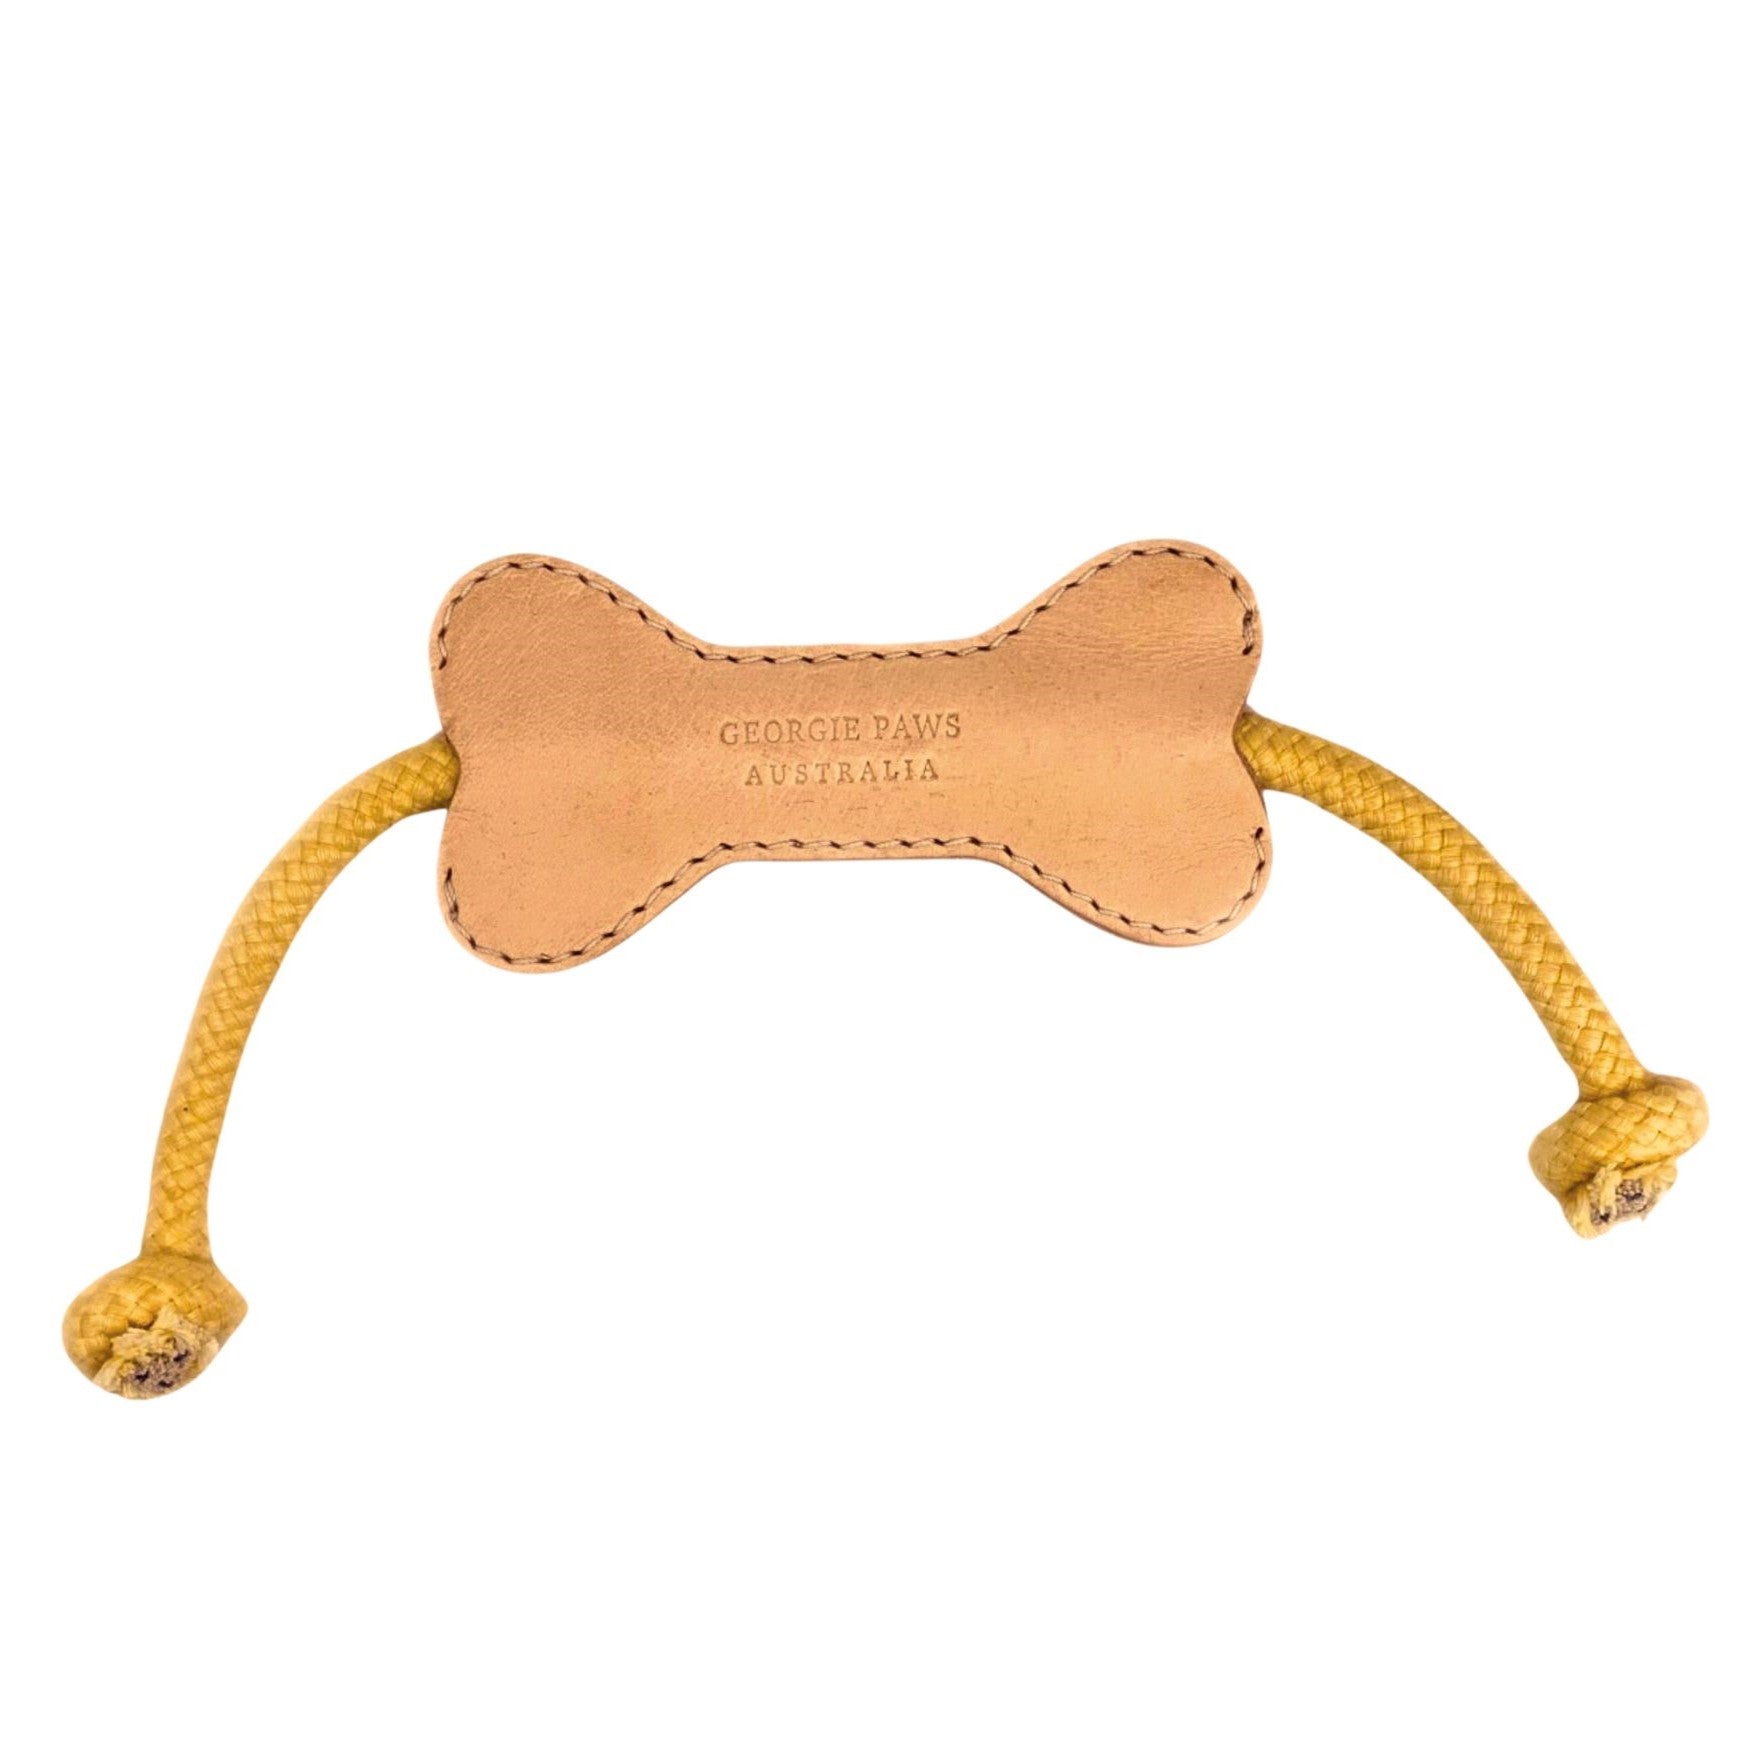 A Flora Bone Toy - Natural with the brand "Georgie Paws" embossed in the center, featuring a simple stitched design and two knotted ropes attached for added playtime fun.